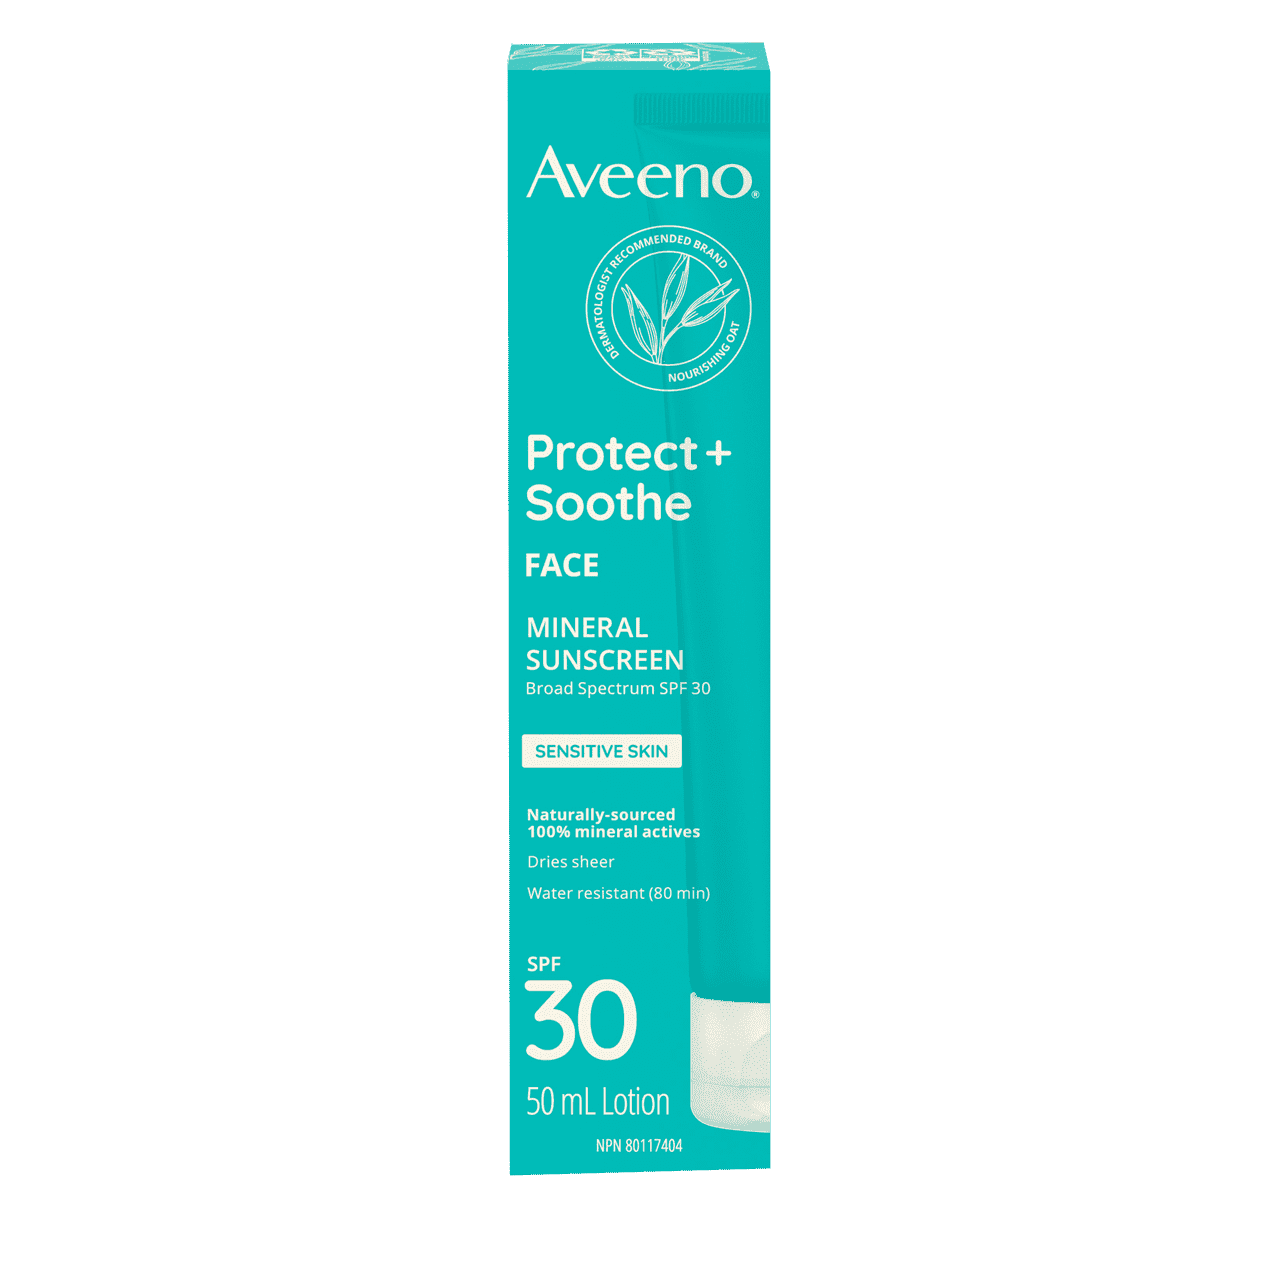 Packaging of AVEENO® Protect + Soothe Face Mineral Sunscreen for Sensitive Skin with SPF 30, 50 mL